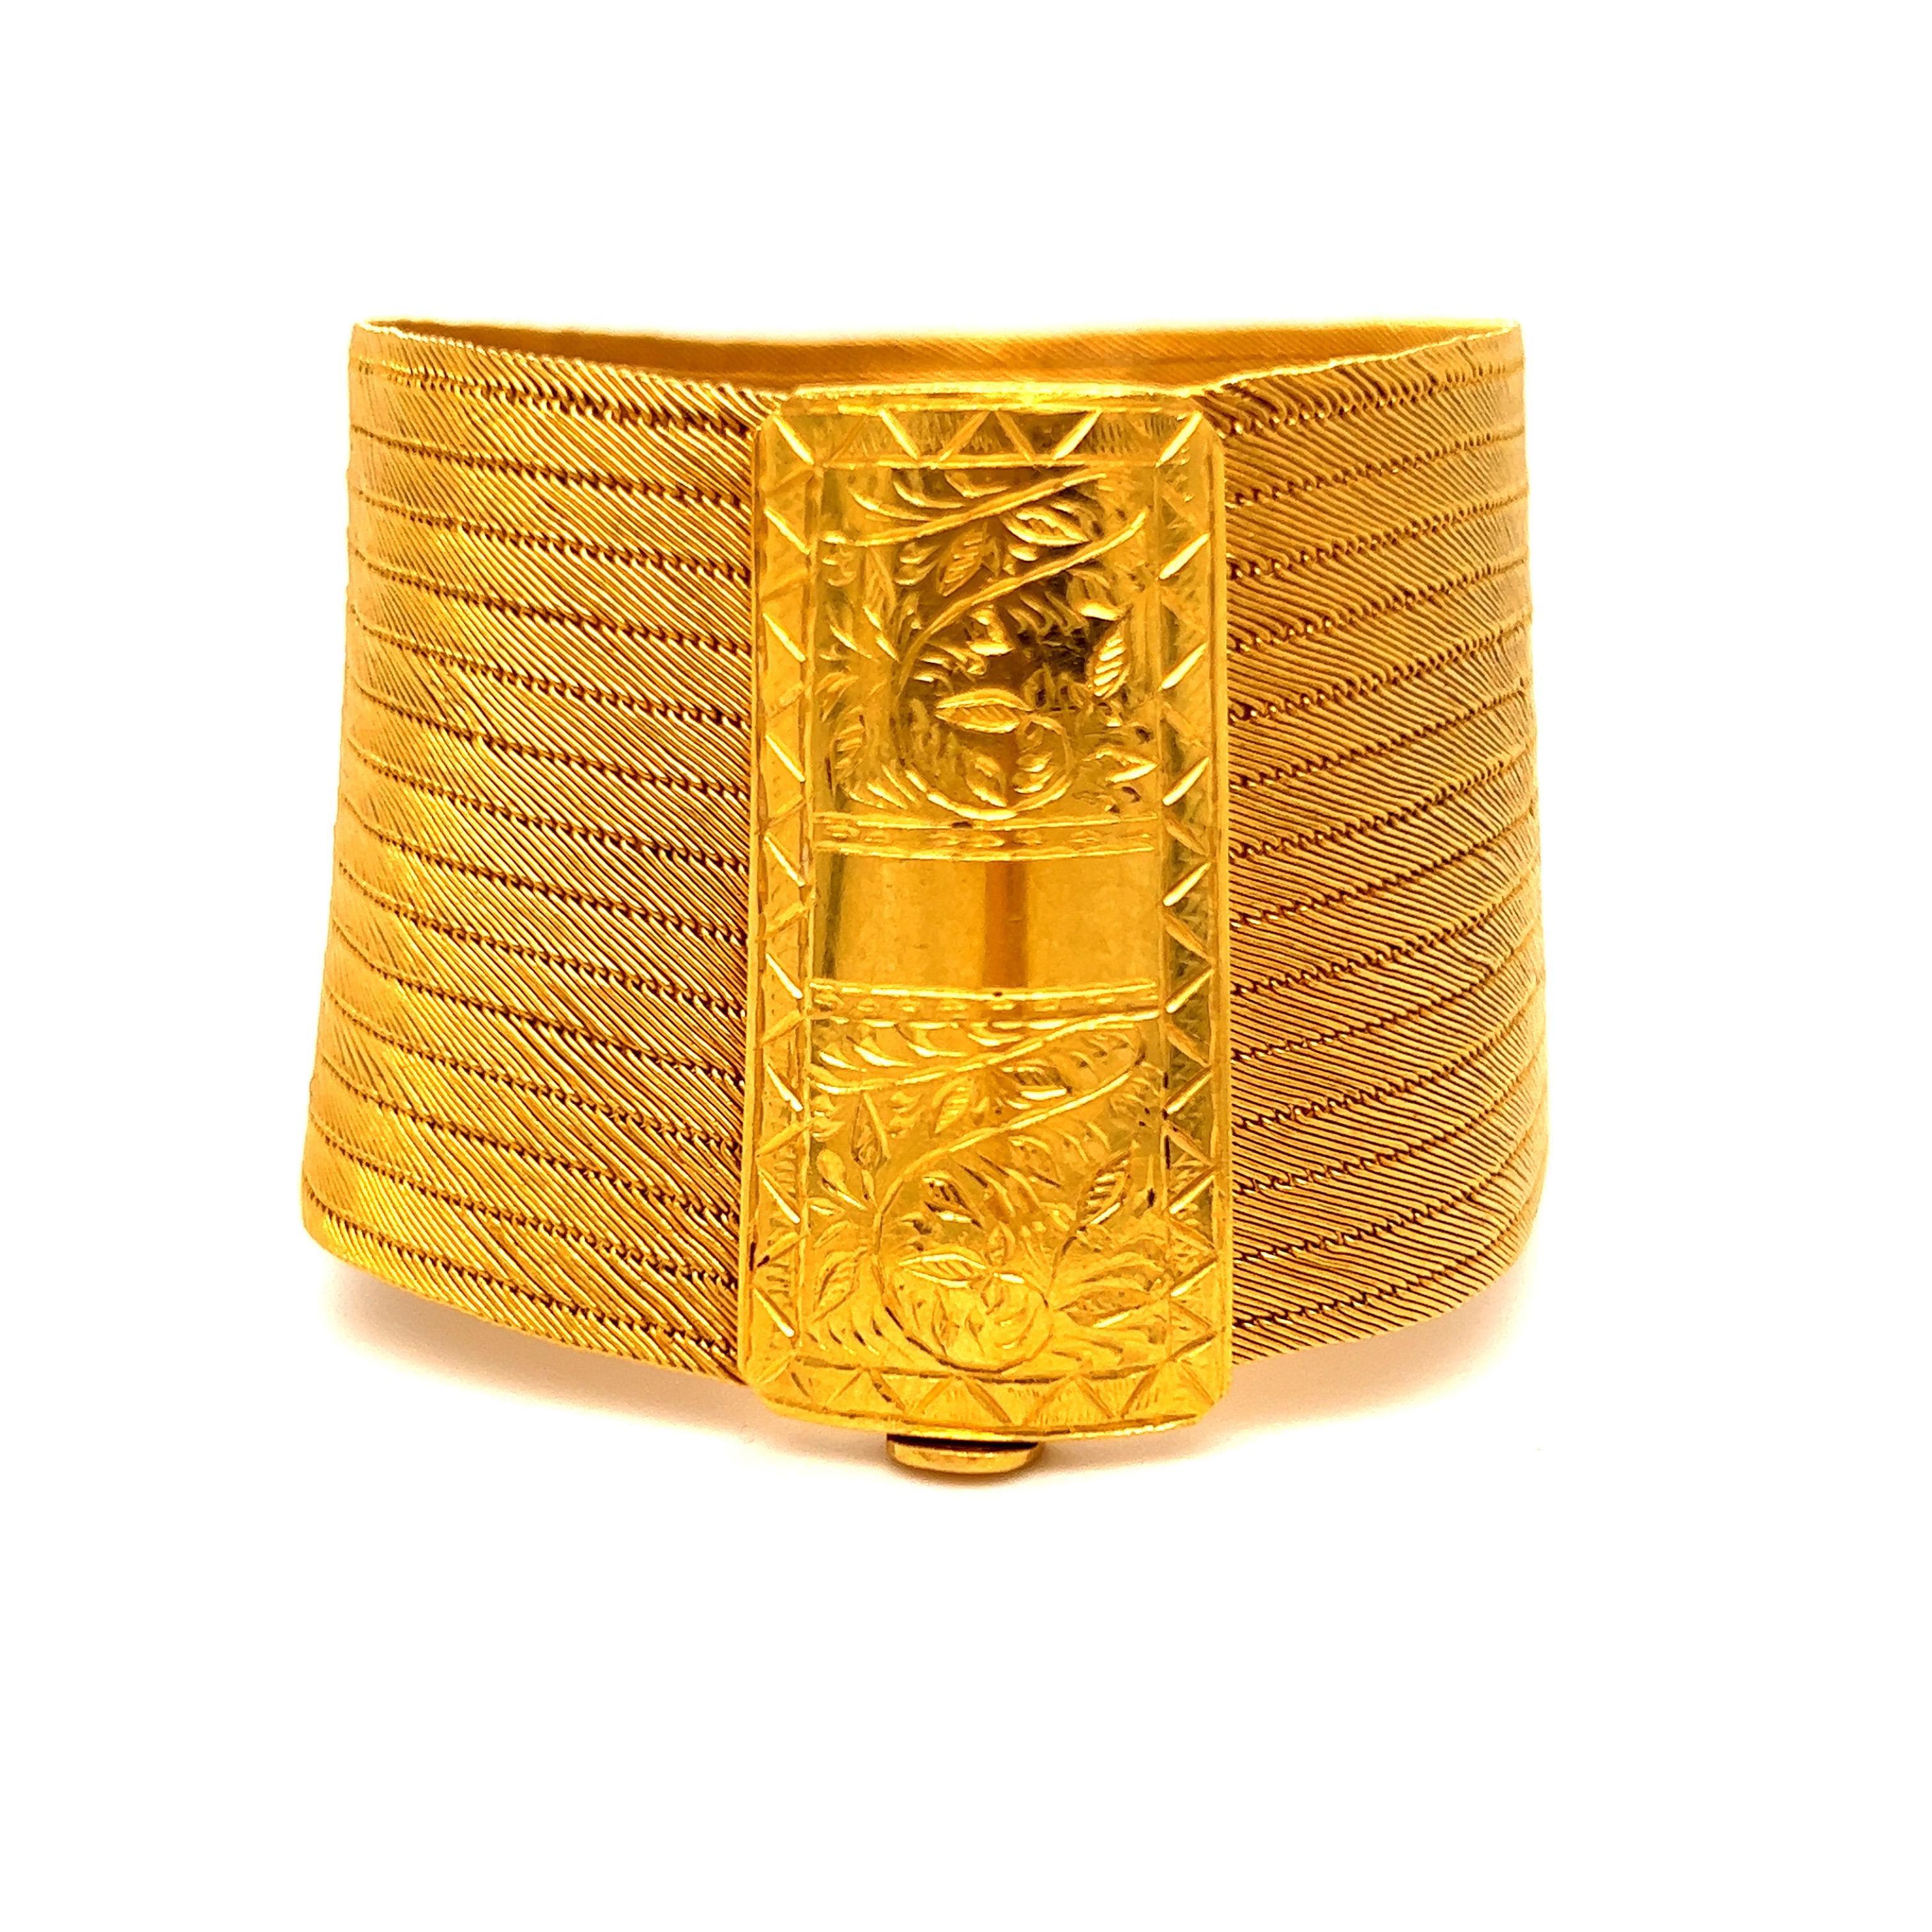 Once in a lifetime find! Honestly I feel like I have been looking for a pair of bracelets like this forever - they are just amazing special and rare. Crafted in 22K Yellow Gold, these ribbon like bracelets show off a complicated woven design, one